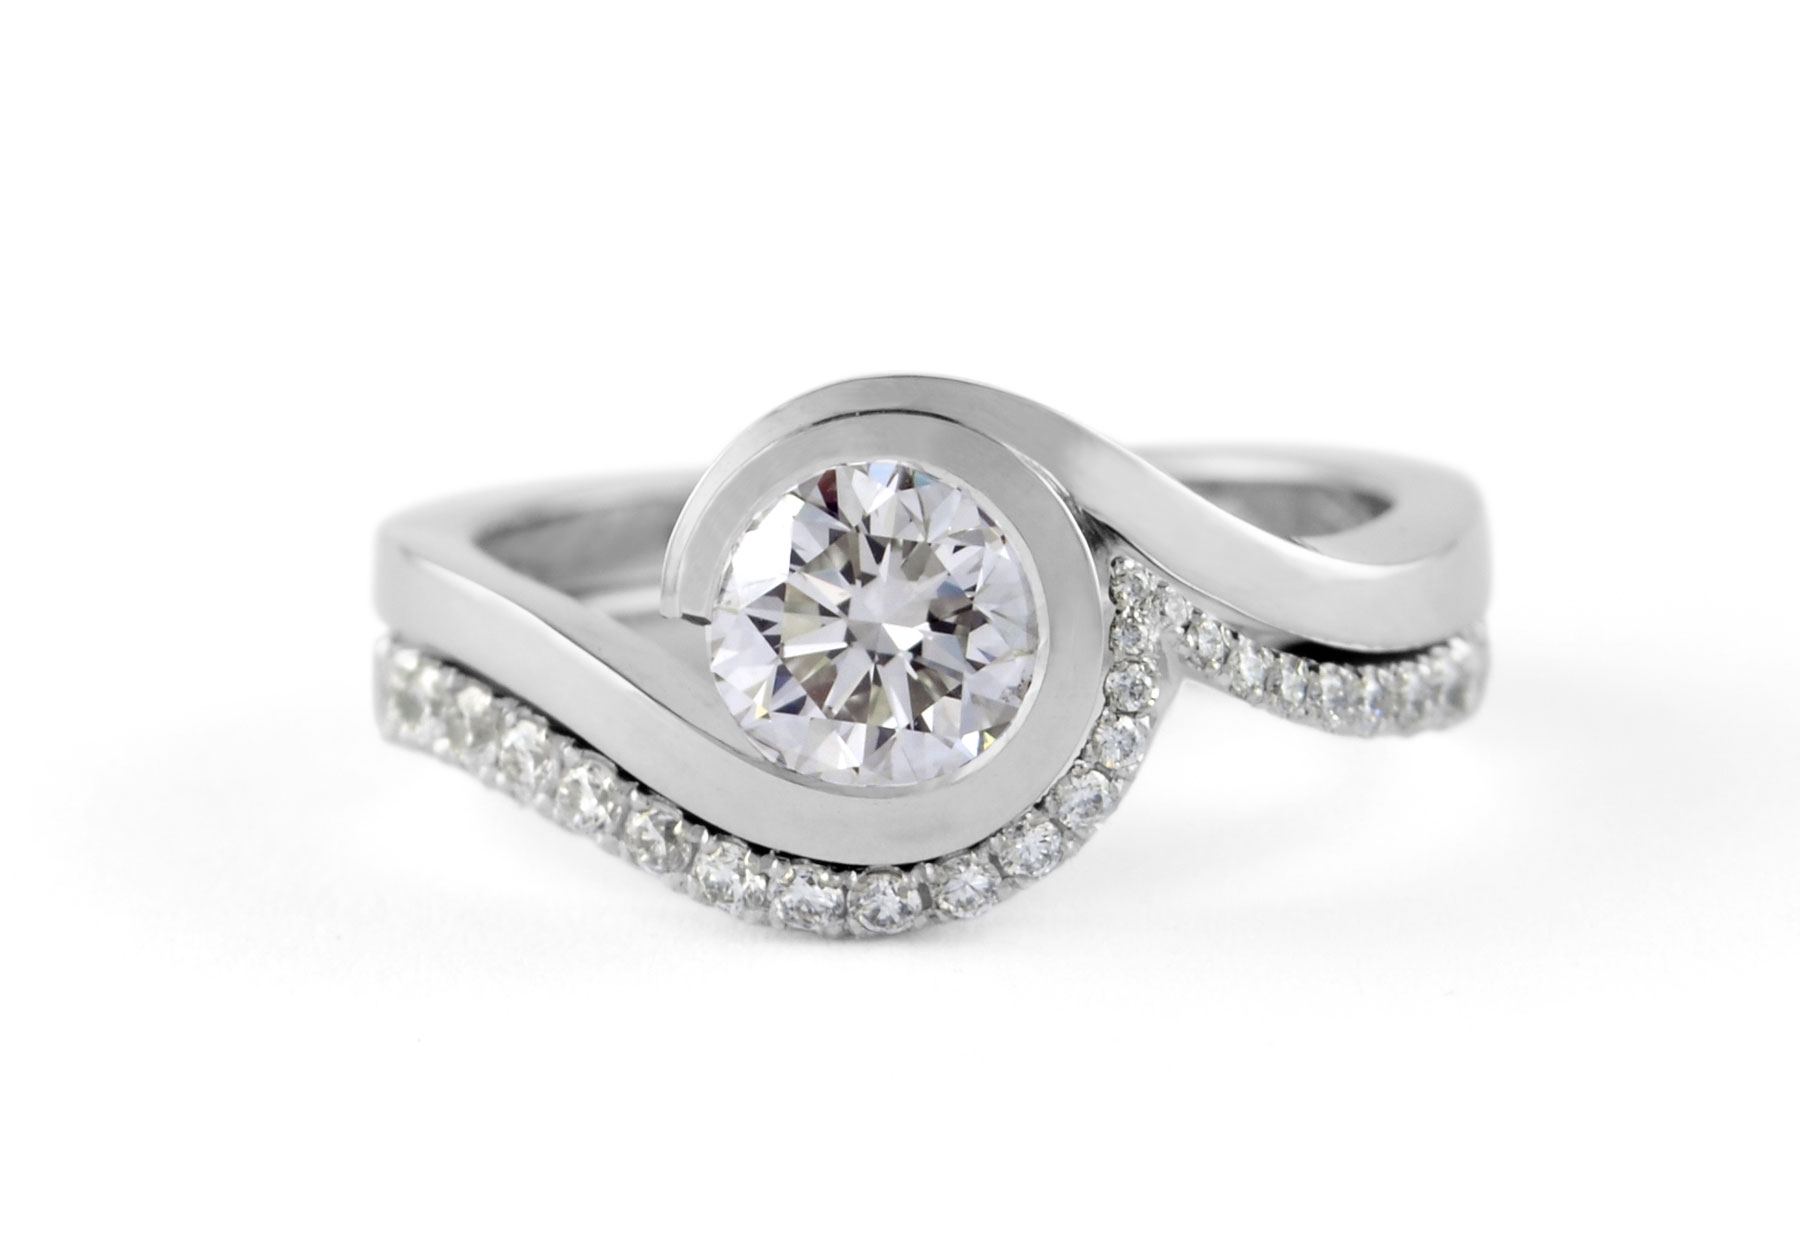 Platinum Engagement Ring with brilliant white diamond and fitted diamond set wedding band